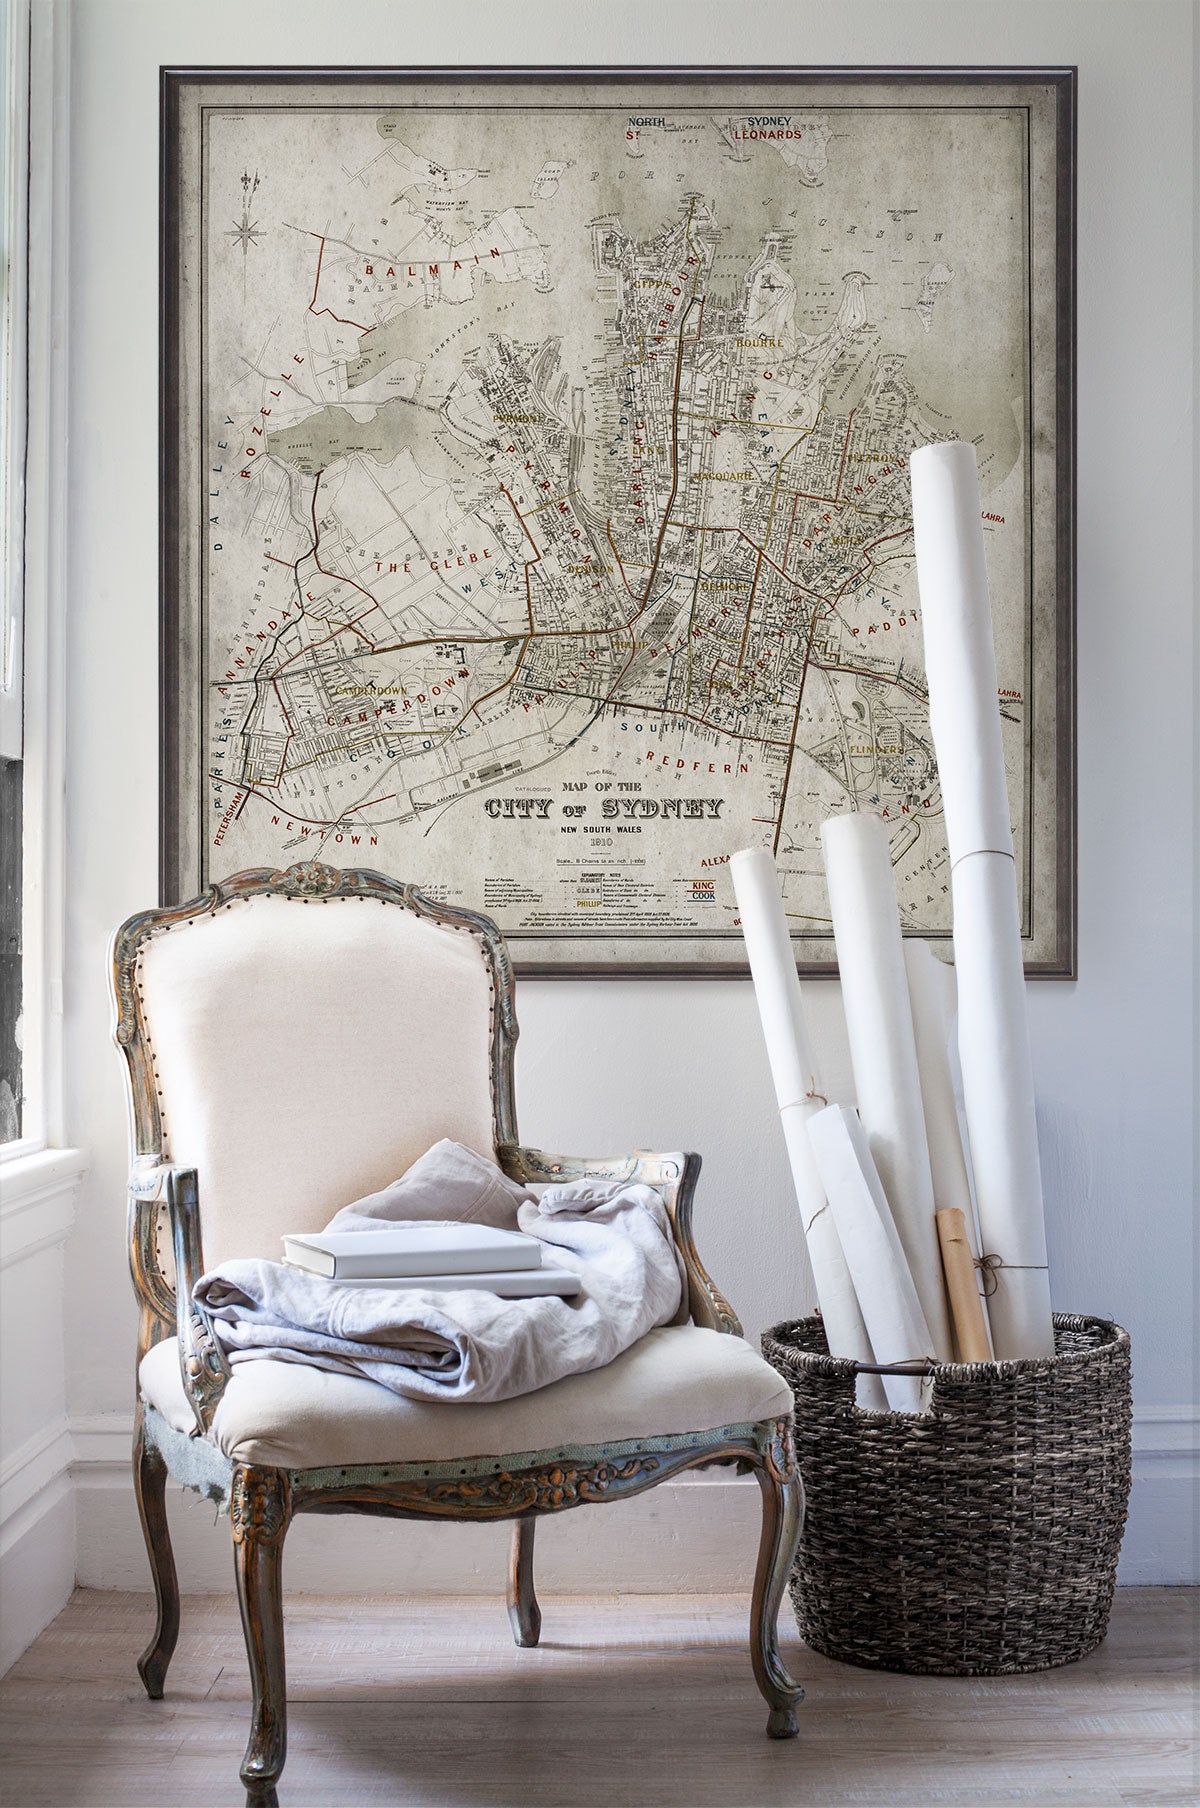 Vintage historic map of Sydney, Australia in room with white walls with vintage furniture and vintage decor.